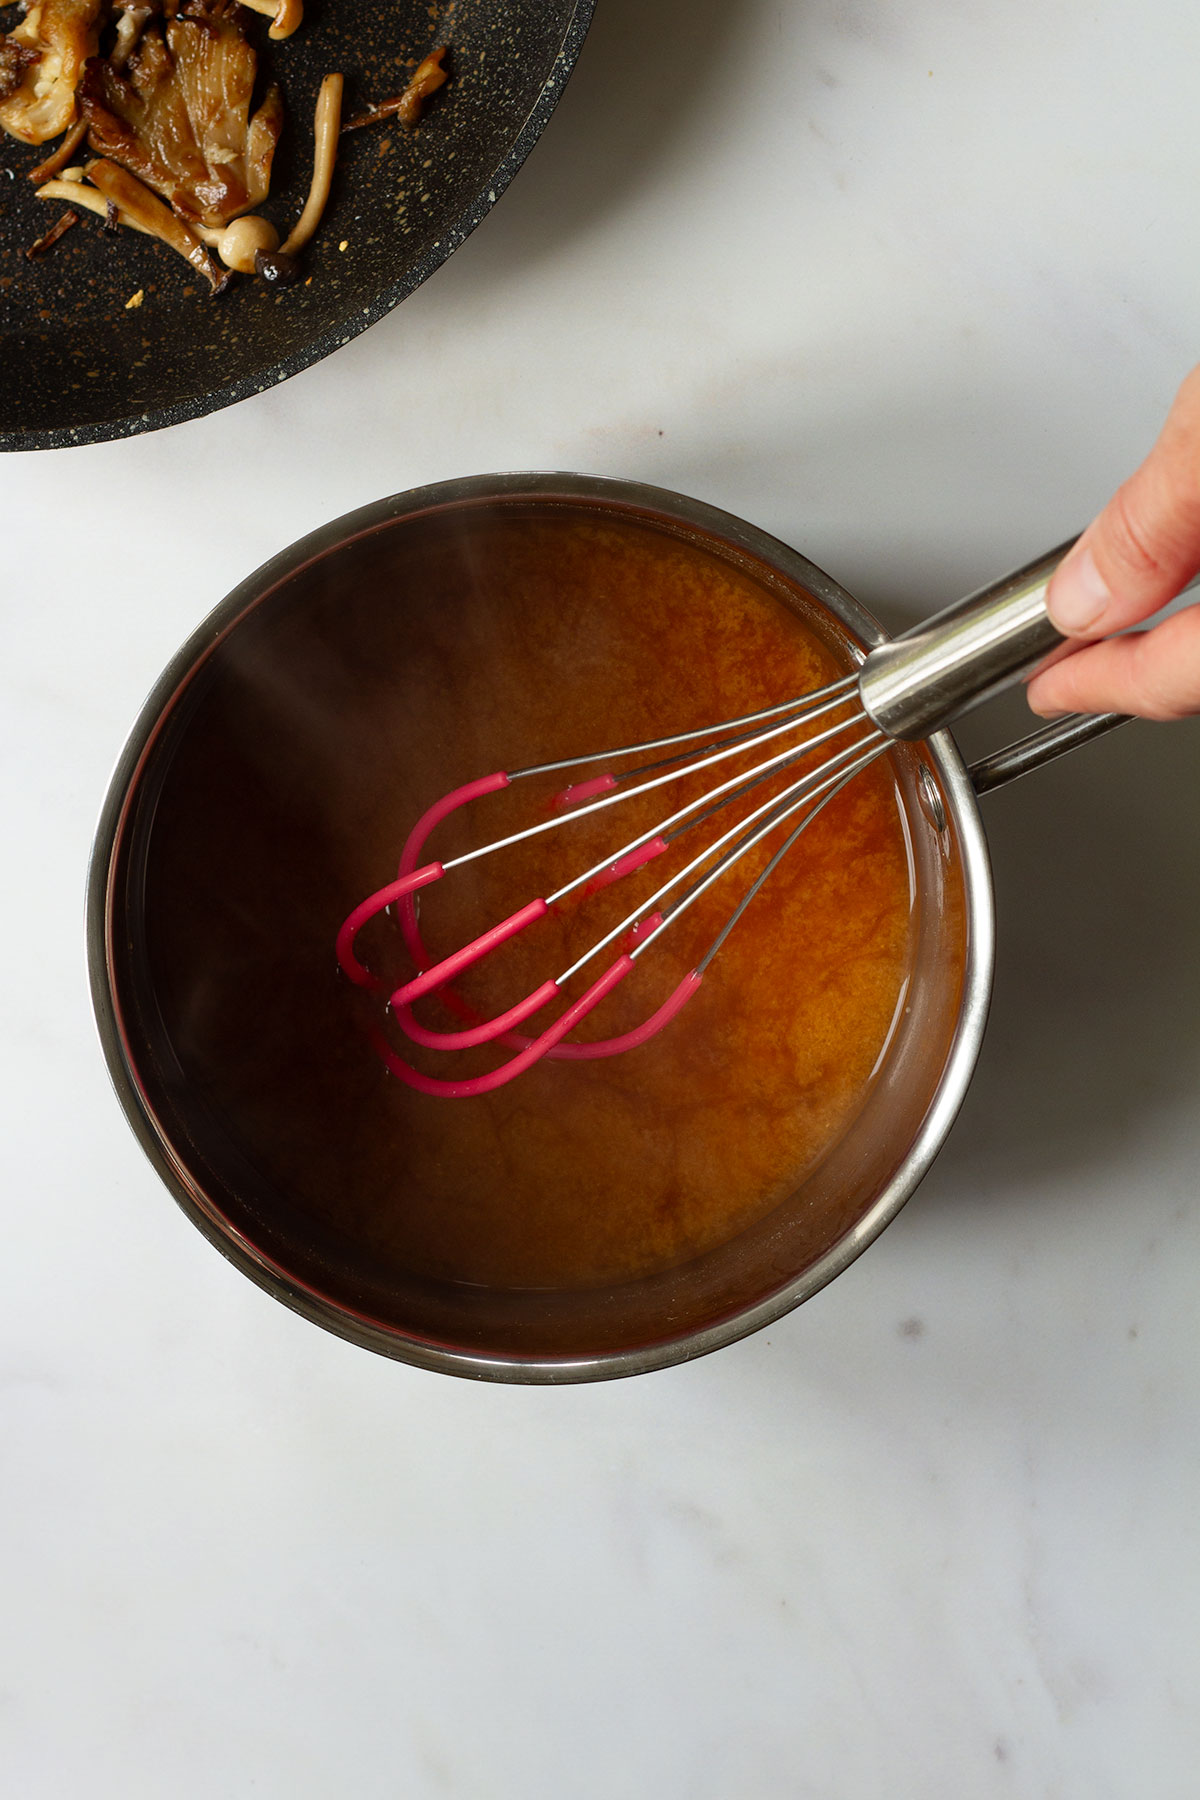 A pan containing miso and dashi with a hand holding a whisk.